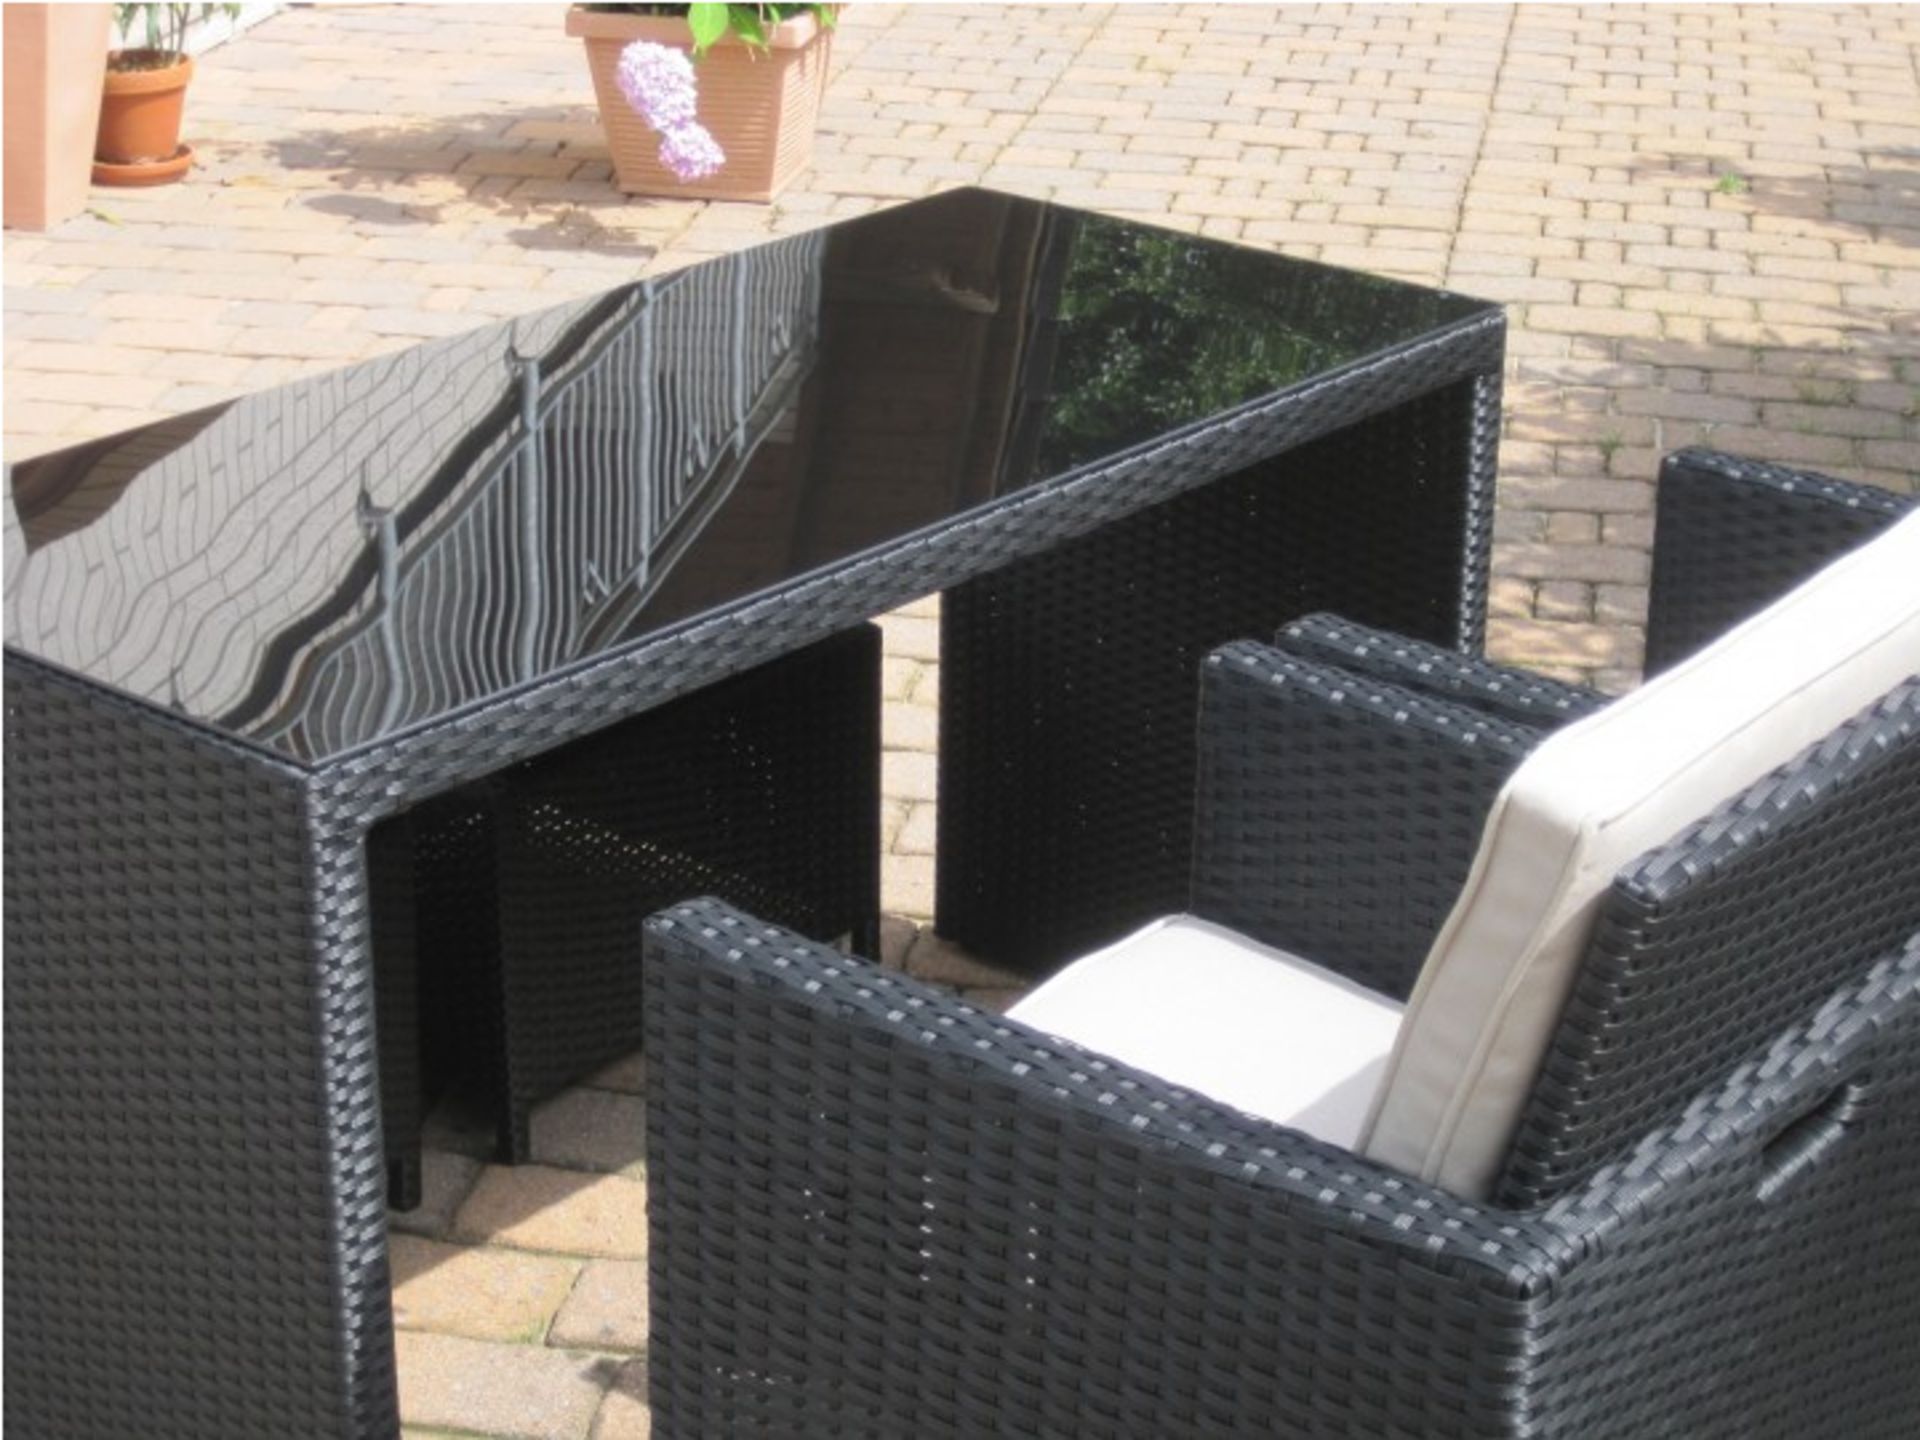 NEW Toscana balcony furniture set in Natural - Image 7 of 13